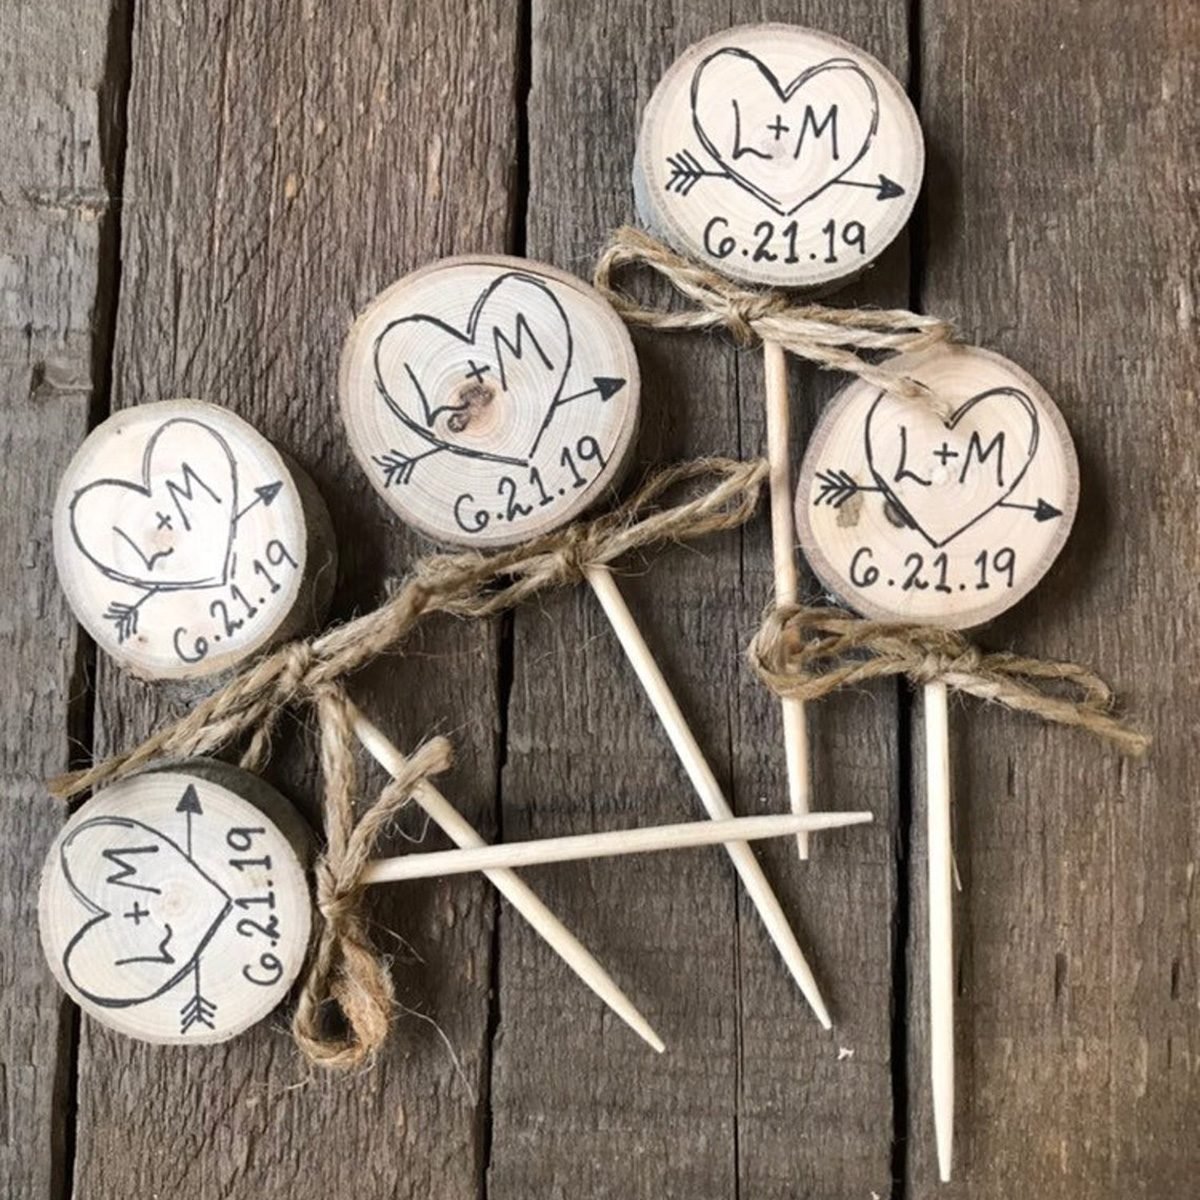 Twine Bows Cupcake Toppers Rustic Wedding Decor Custom Initials & Date / Heart Arrow / Engagement Rustic Bridal Shower Decor Party Picks